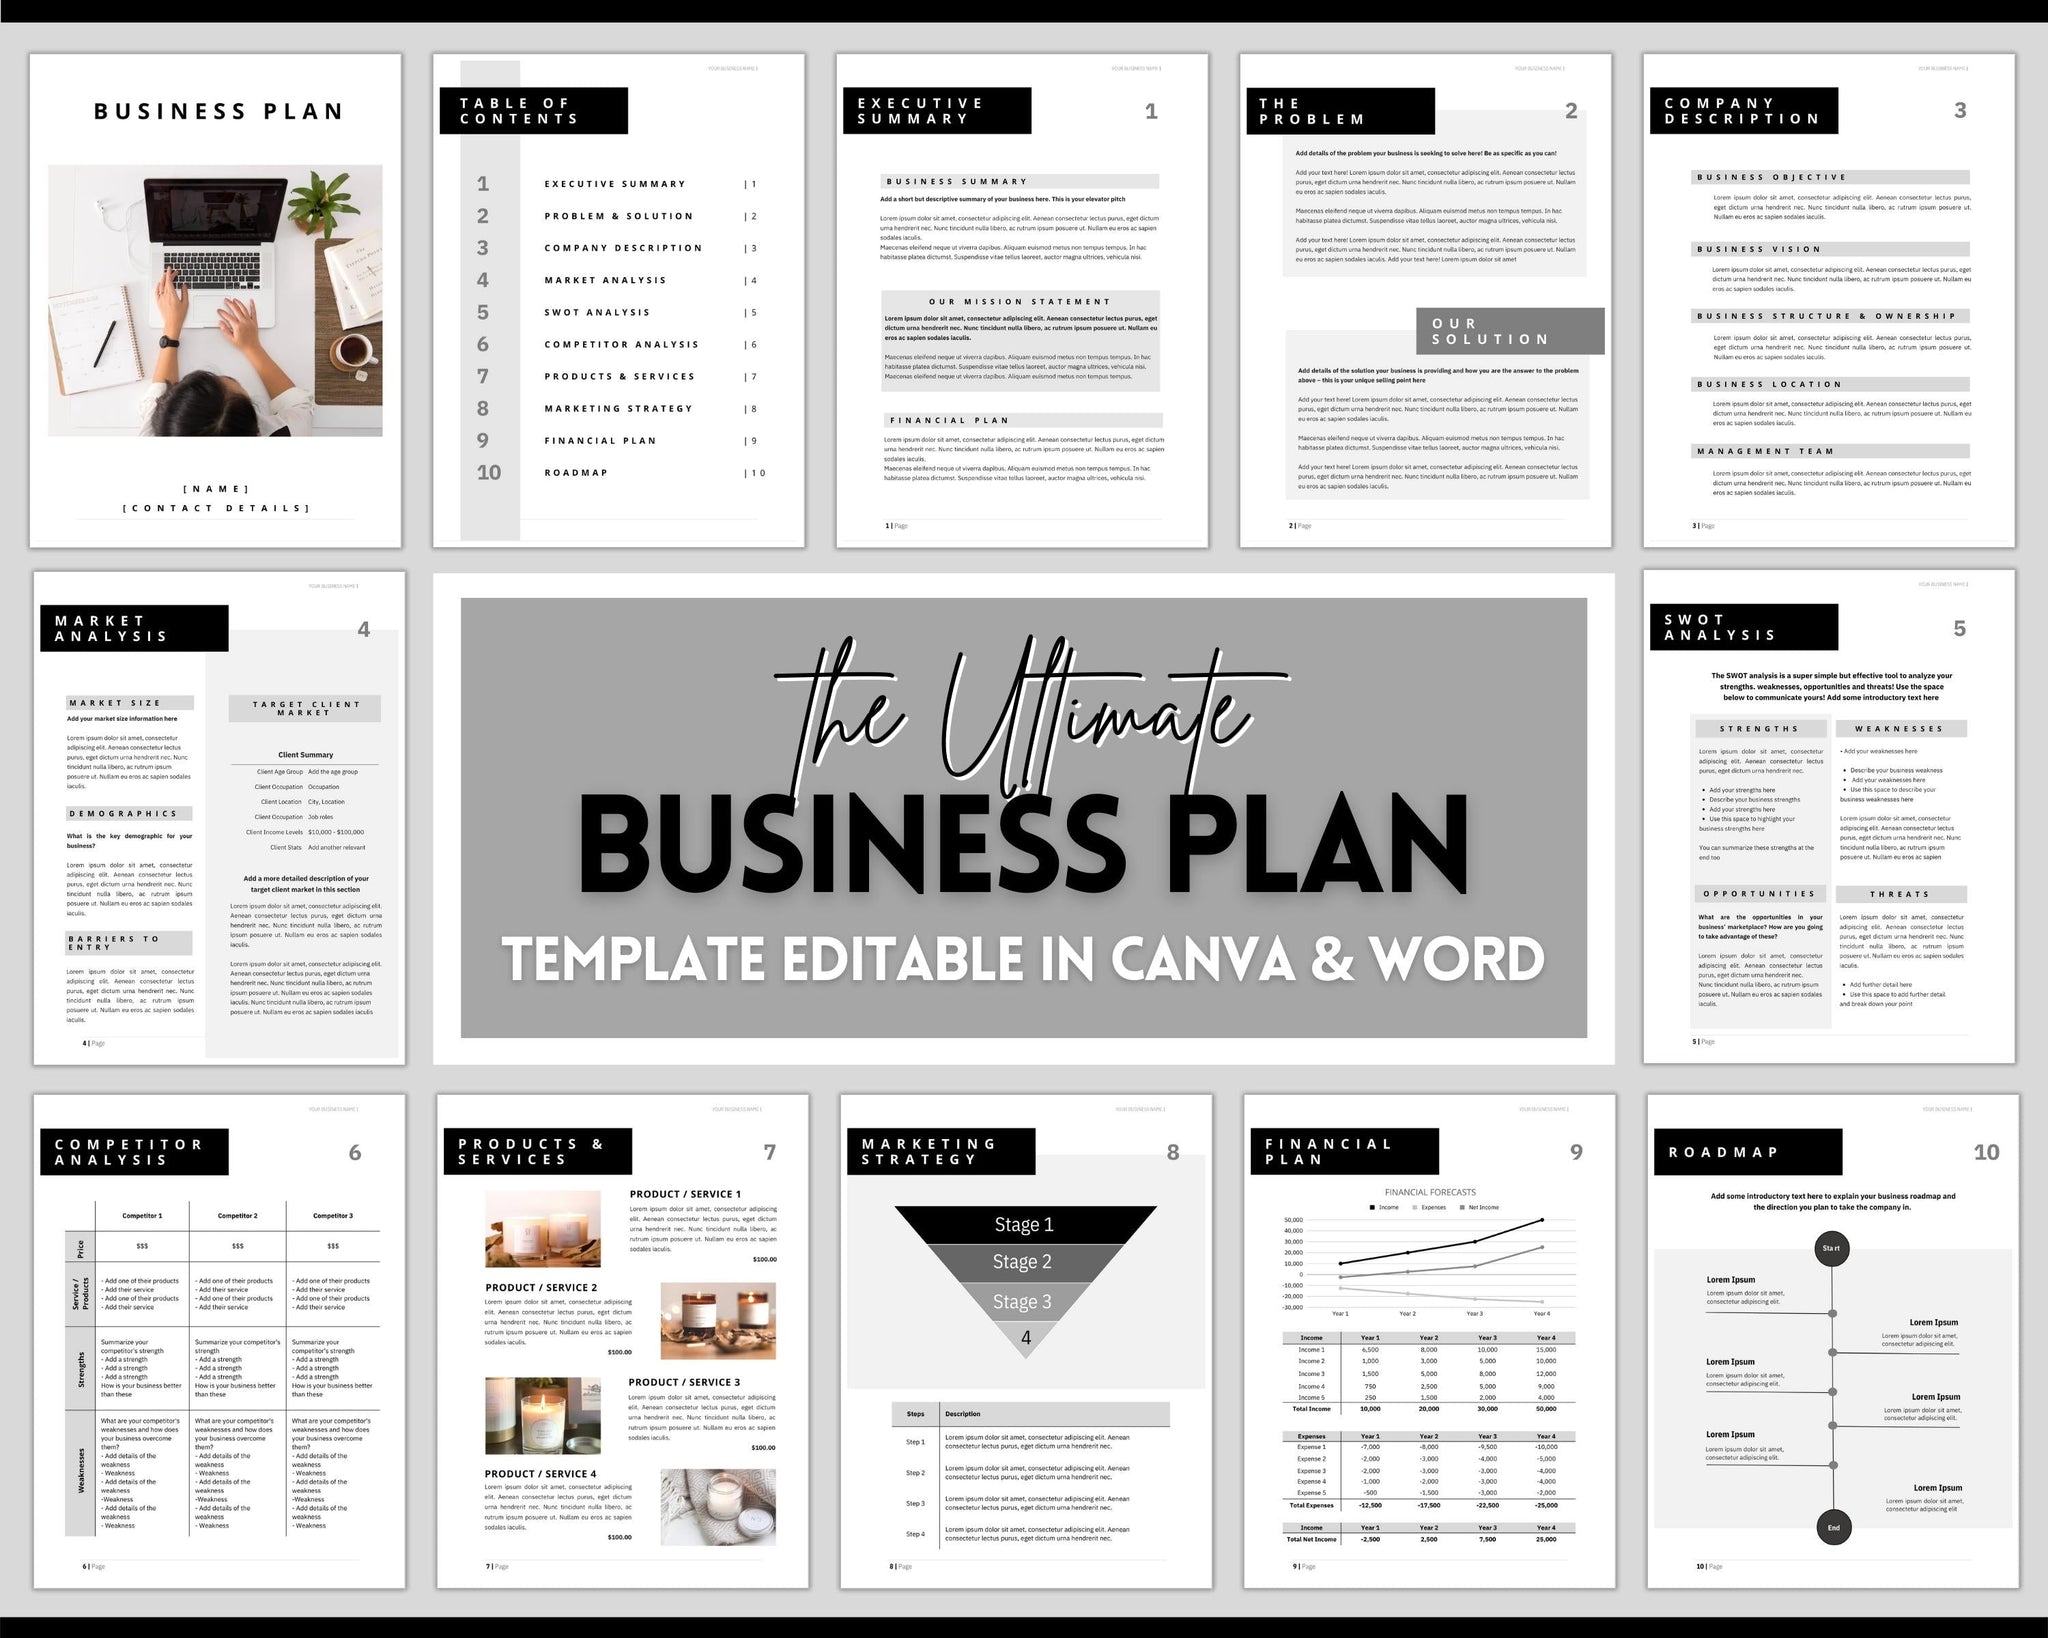 Business Proposal Template, Small Business Planner, Start up Workbook,  Business Plan Analysis, Canva, Word, Side Hustle, EDITABLE Plan 